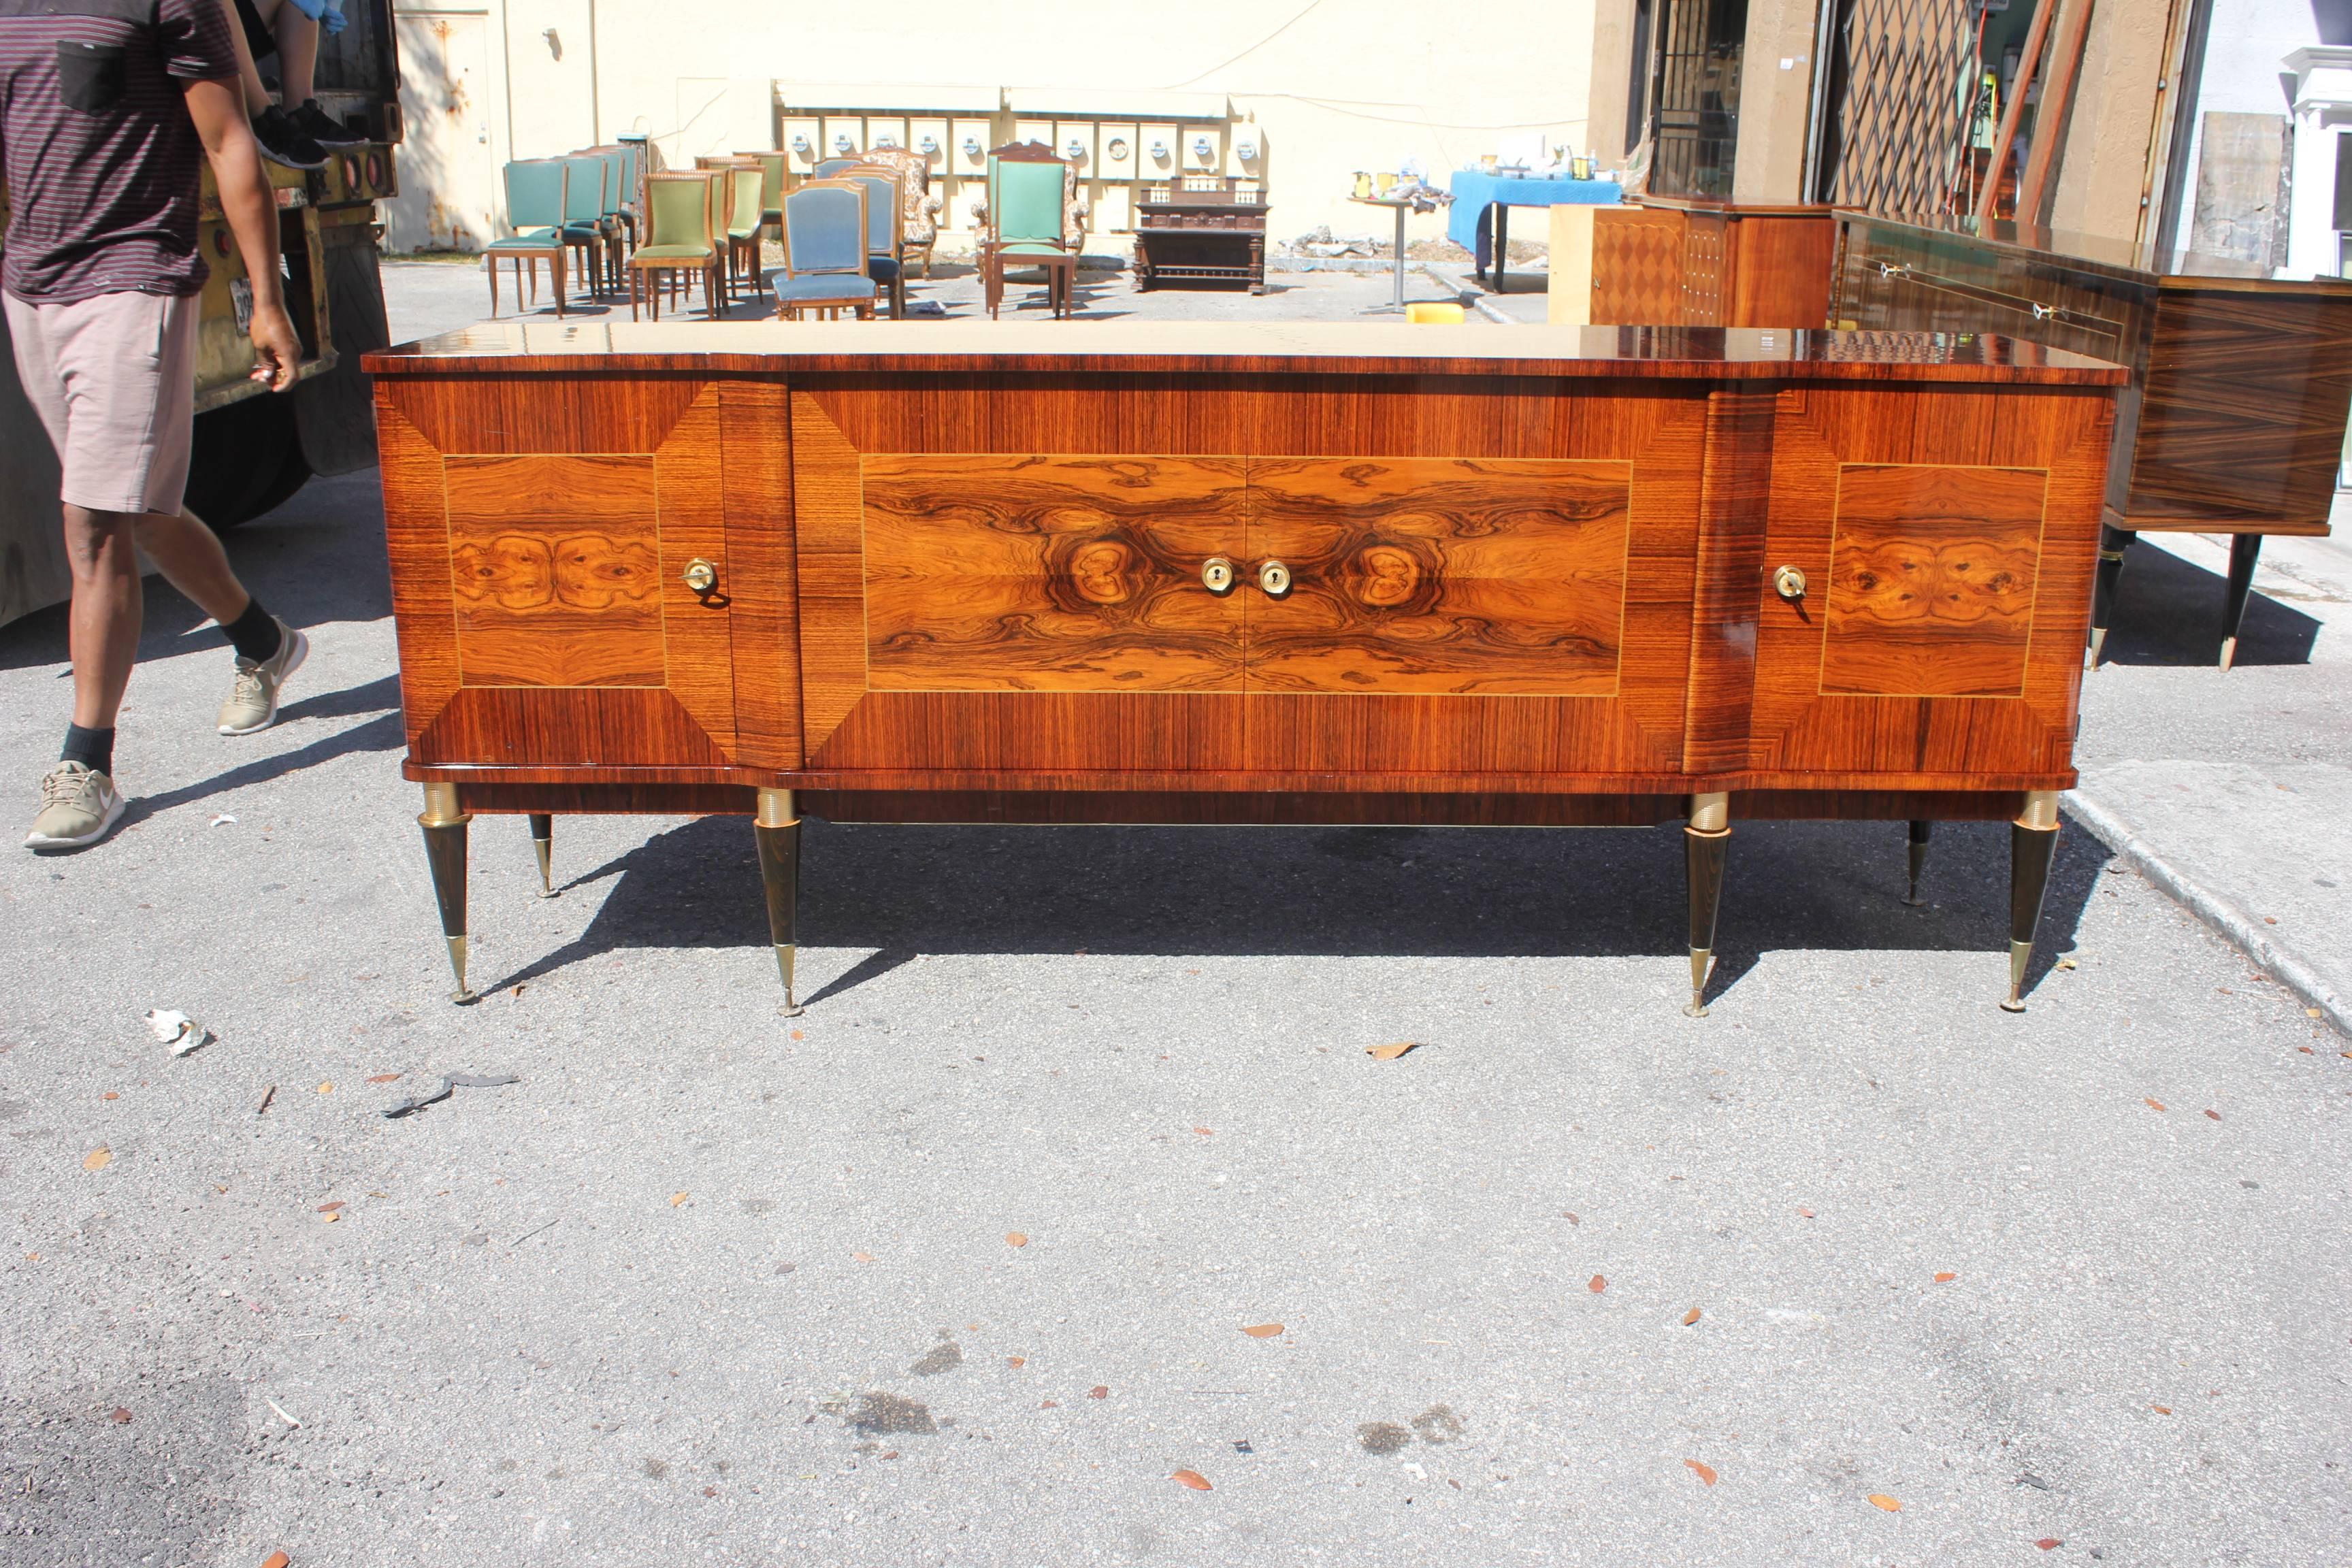 Description long French art deco exotic Macassar ebony sideboard or buffet with two centre drawers inside and we have all shelves, beautiful bronze hardware detail, circa 1940. Please note these buffets can be taken apart to accommodate elevator